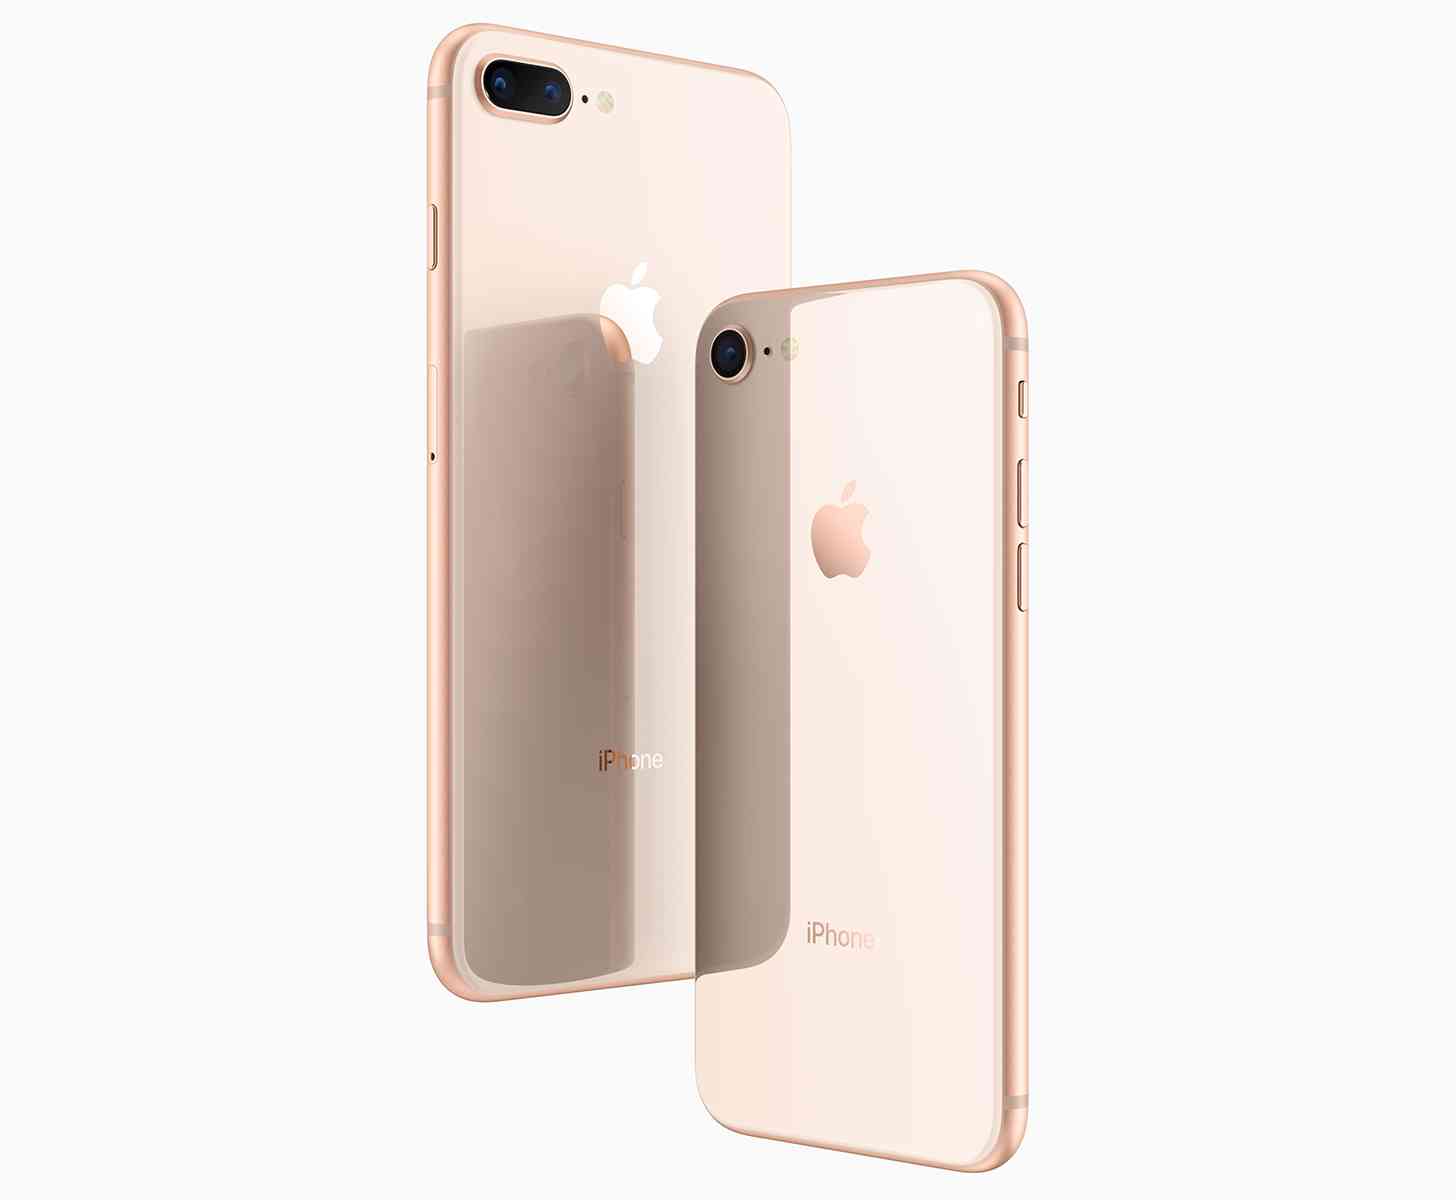 iPhone 8, iPhone 8 Plus official gold